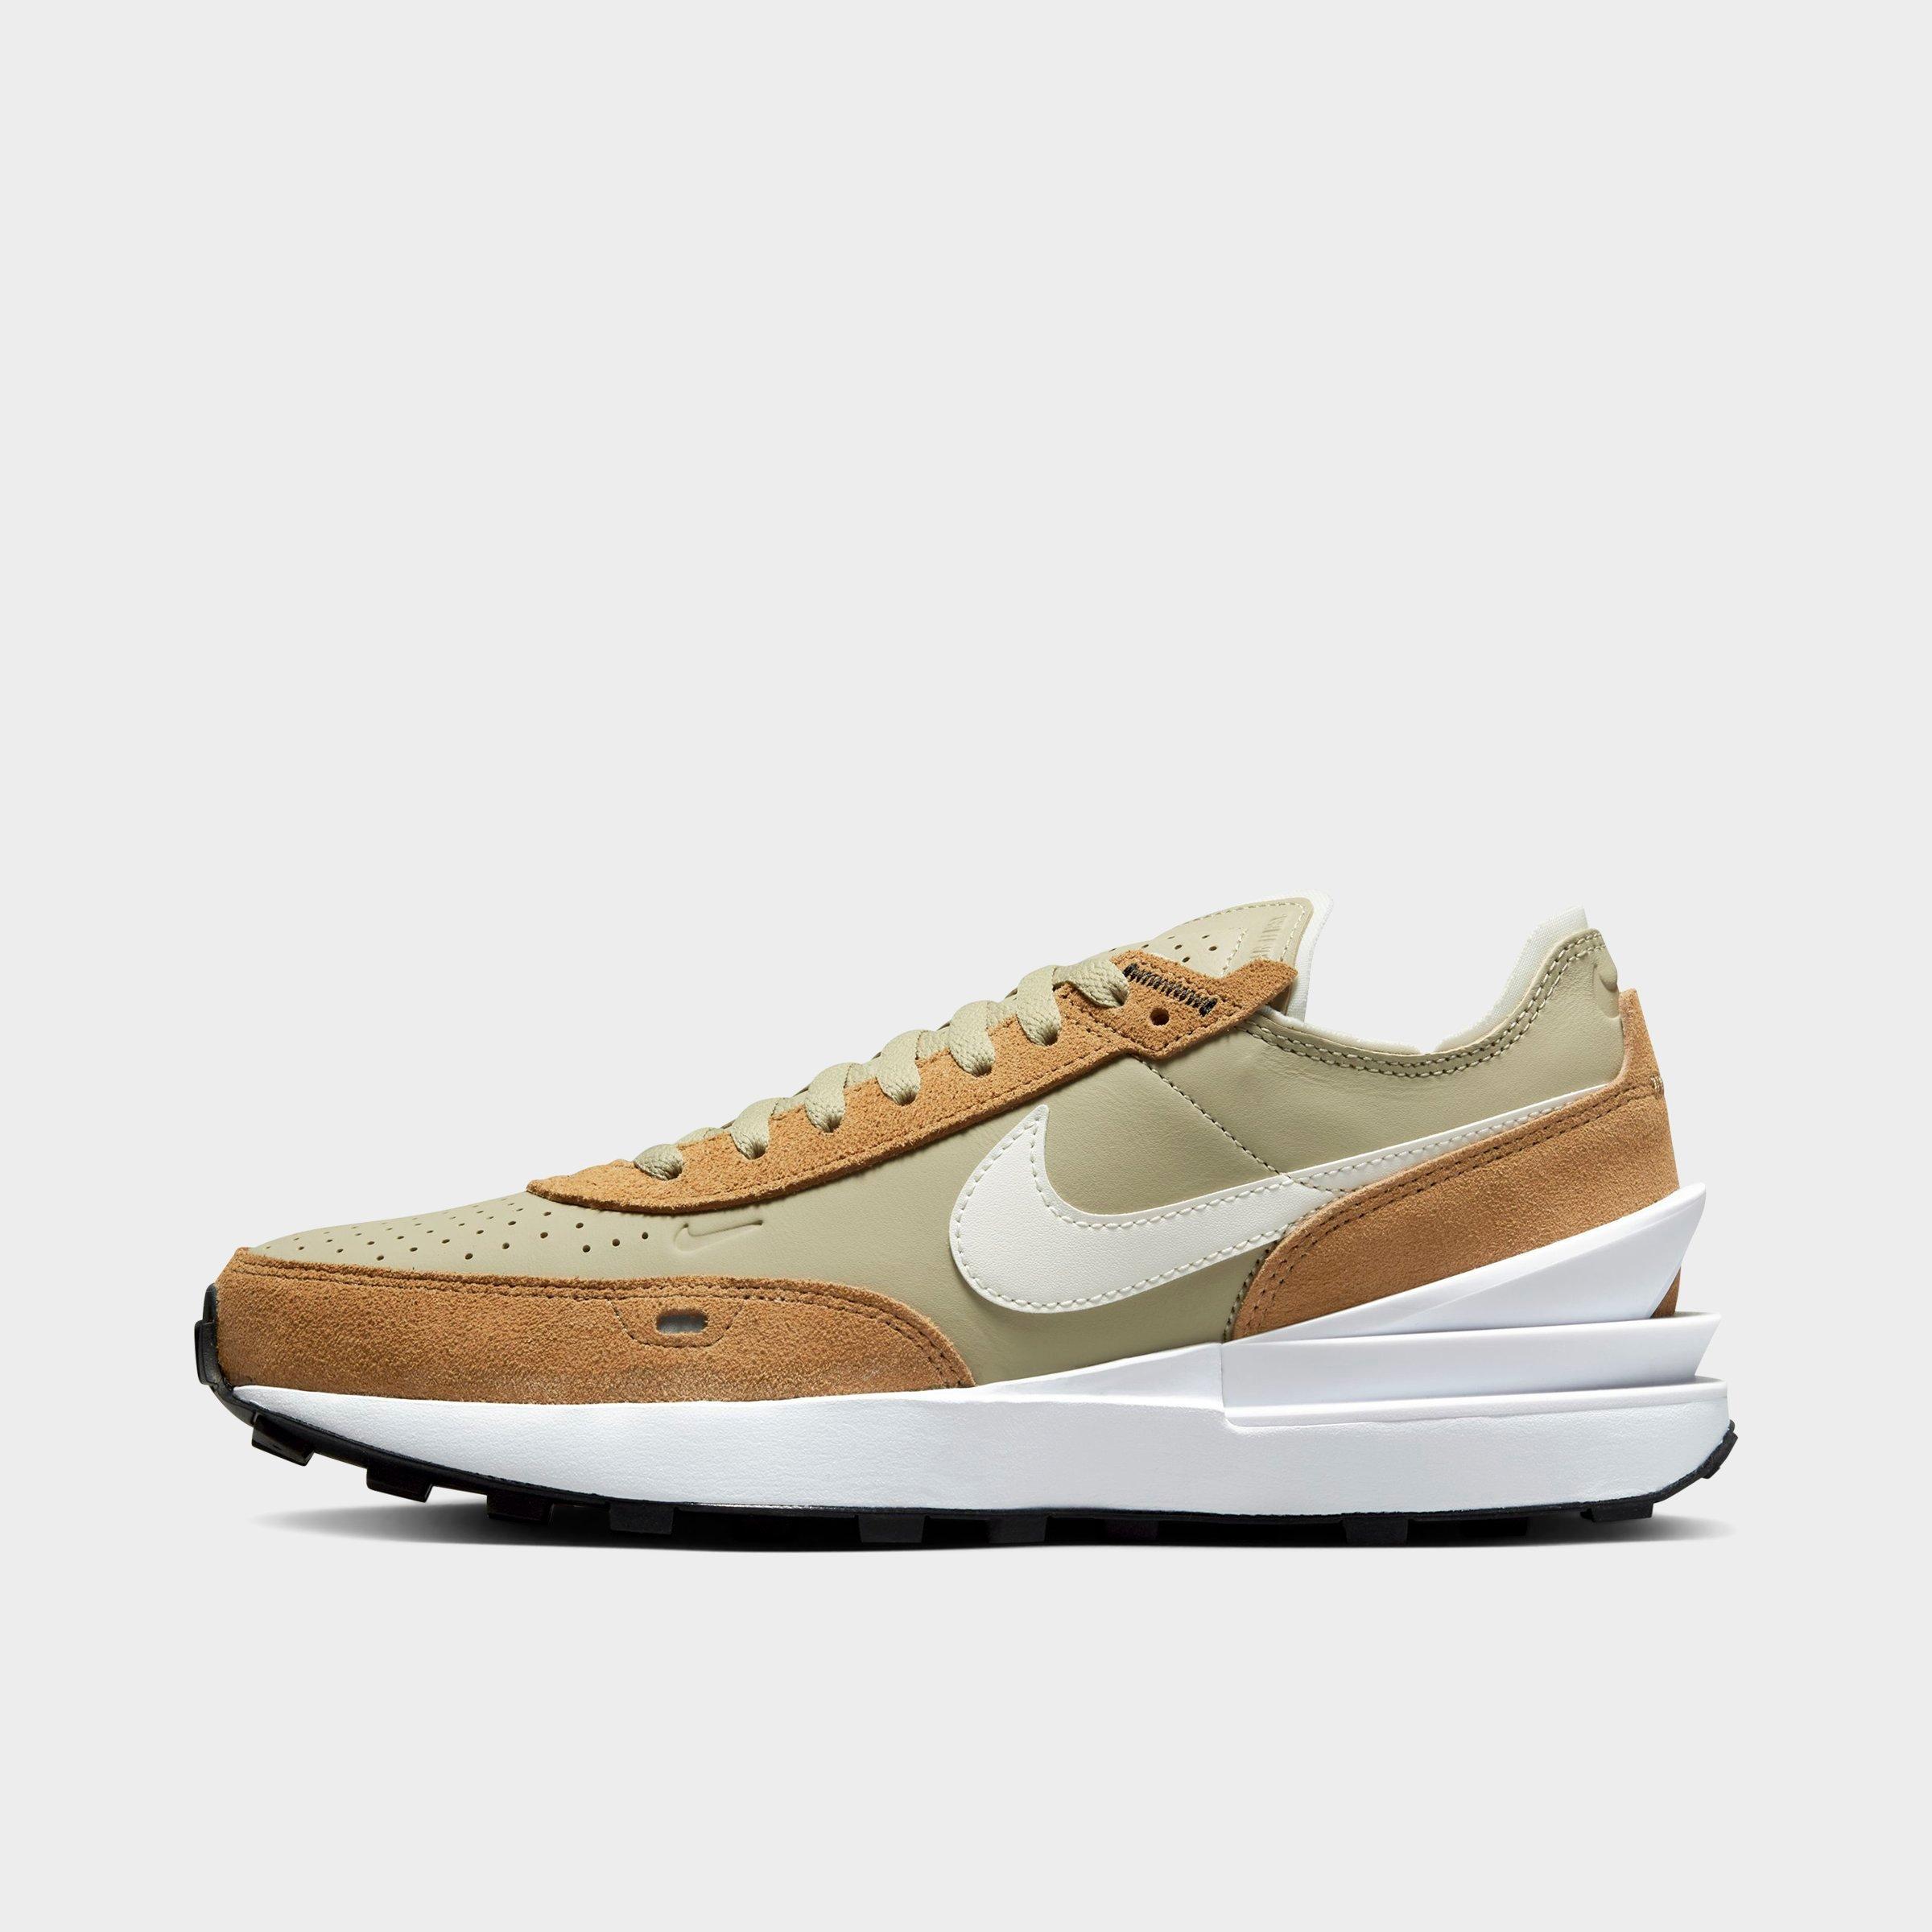 NIKE NIKE MEN'S WAFFLE ONE LEATHER CASUAL SHOES